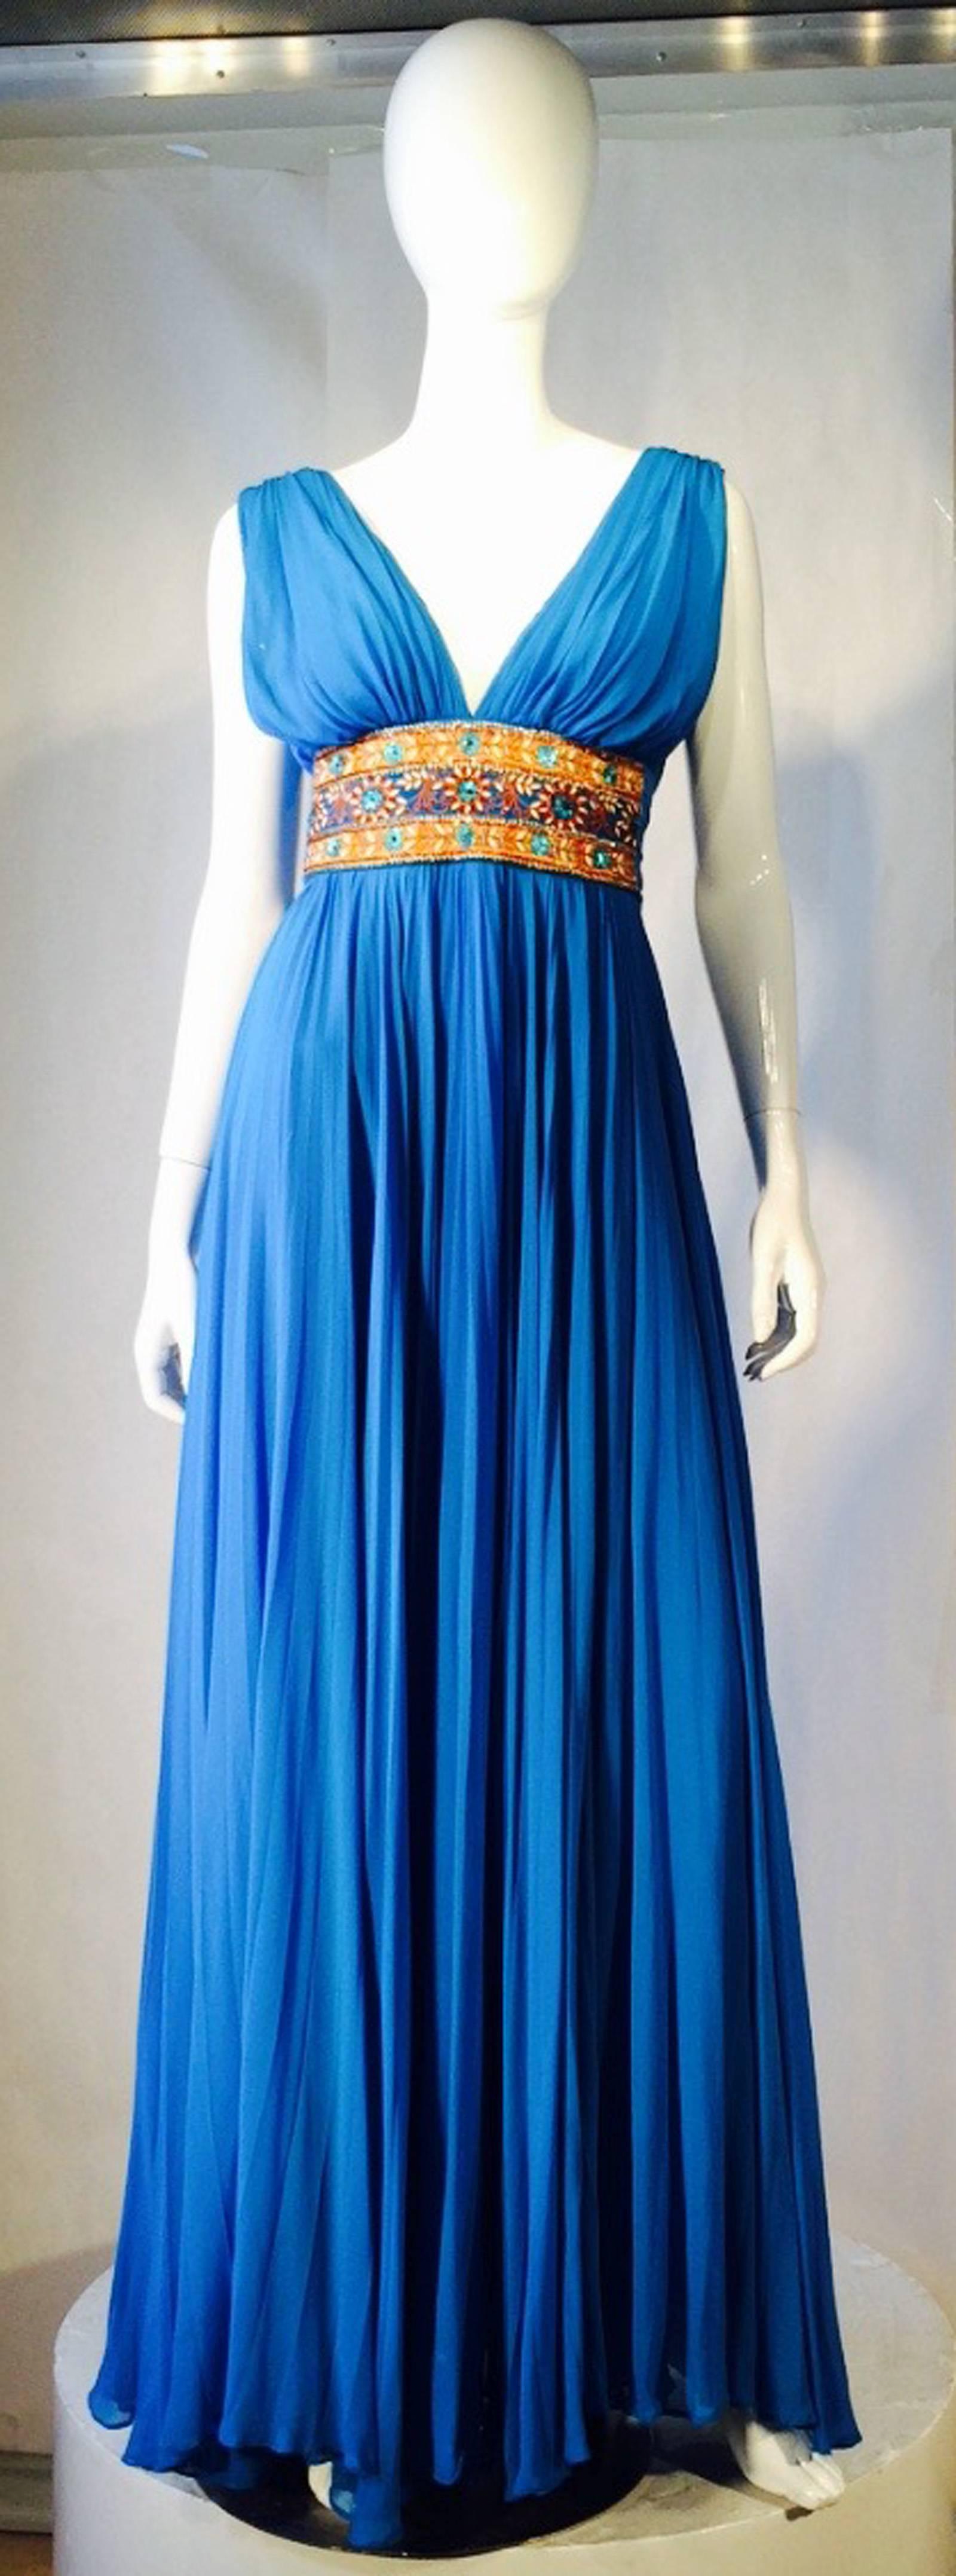 A gotgeous vintage Reem Acra Grecian column gown. Vibrant blue Azur silk chiffon item features a wide embroidered and beaded waistband, pleated bodice and skirt. Item fully silk lined and zips up back. Exquisite hand-finished item appears unworn.